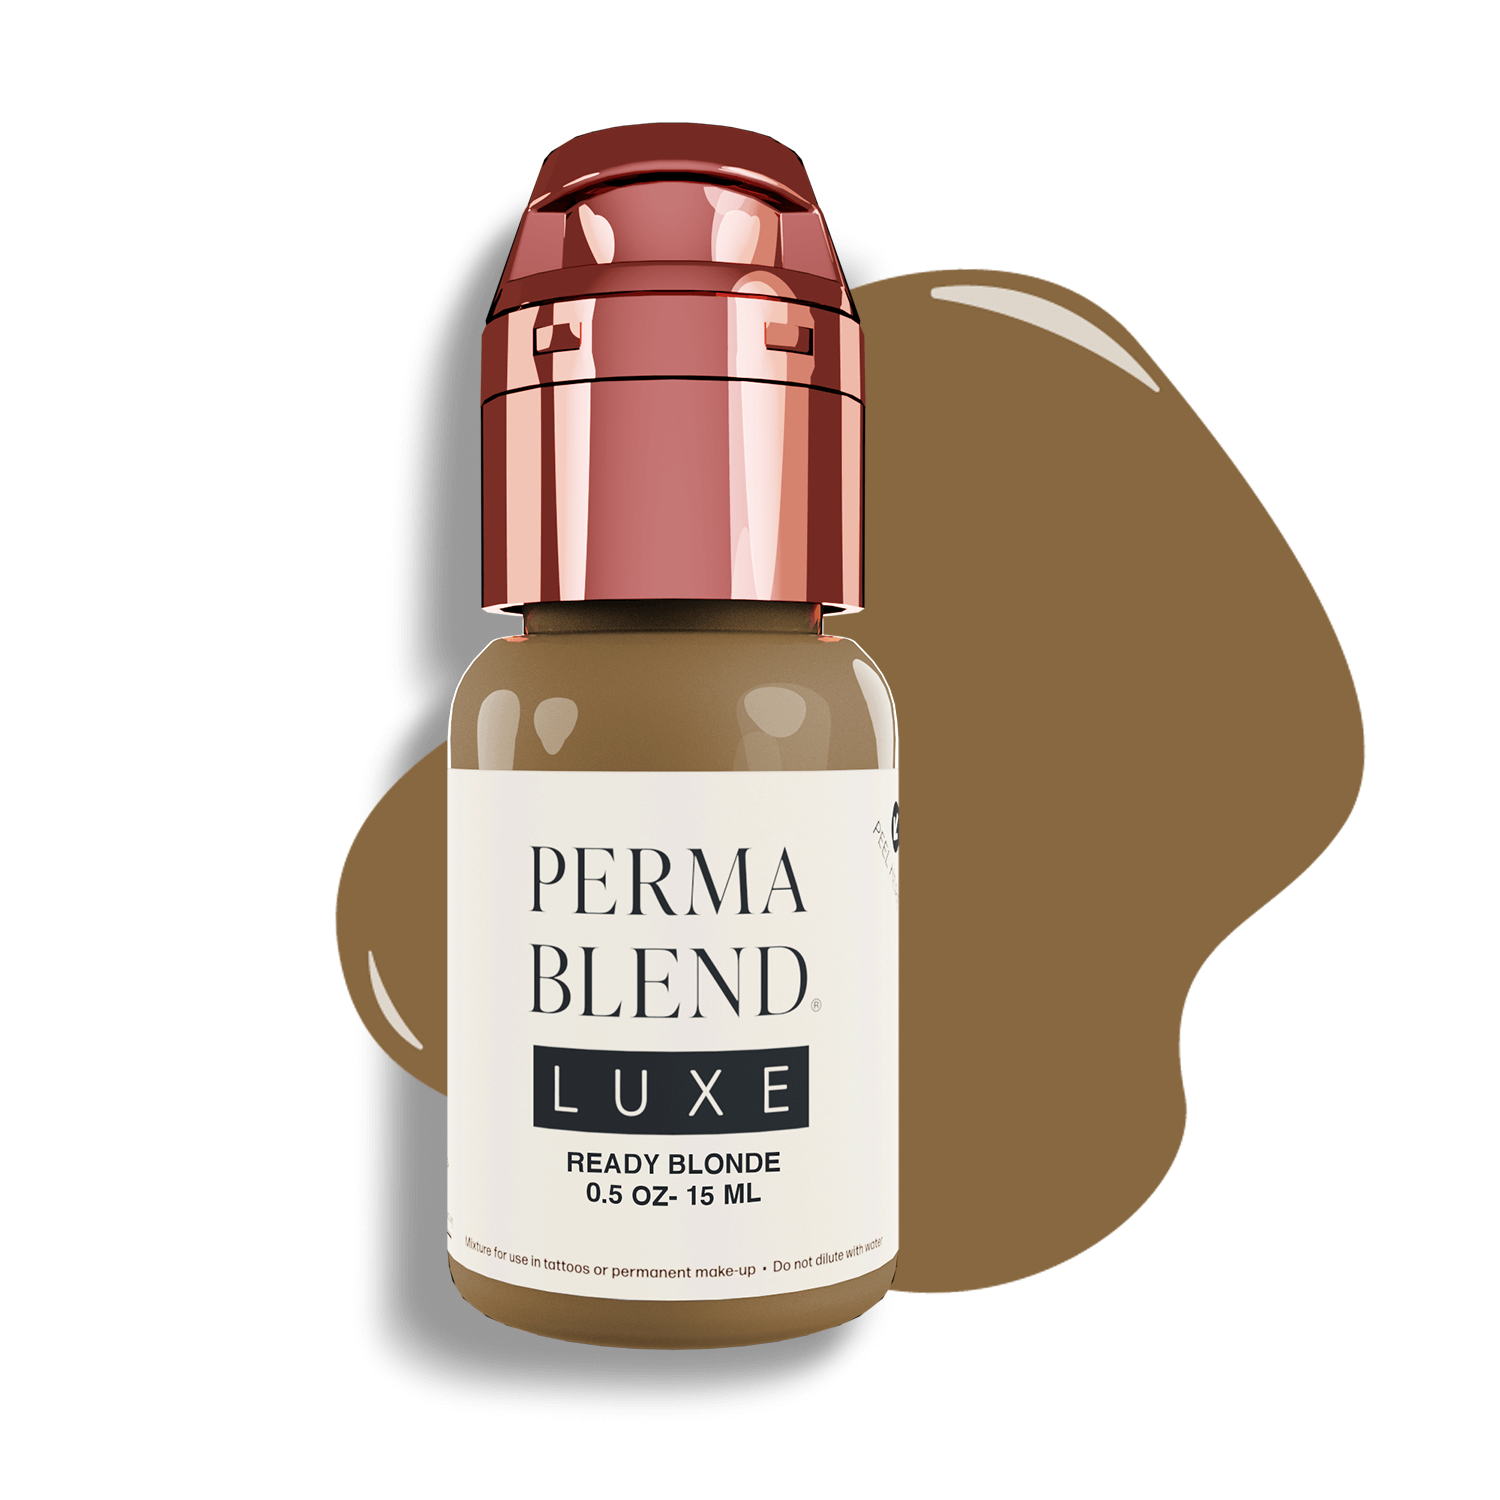 PermaBlend LUXE Eyebrow Pigment - Ready Blonde